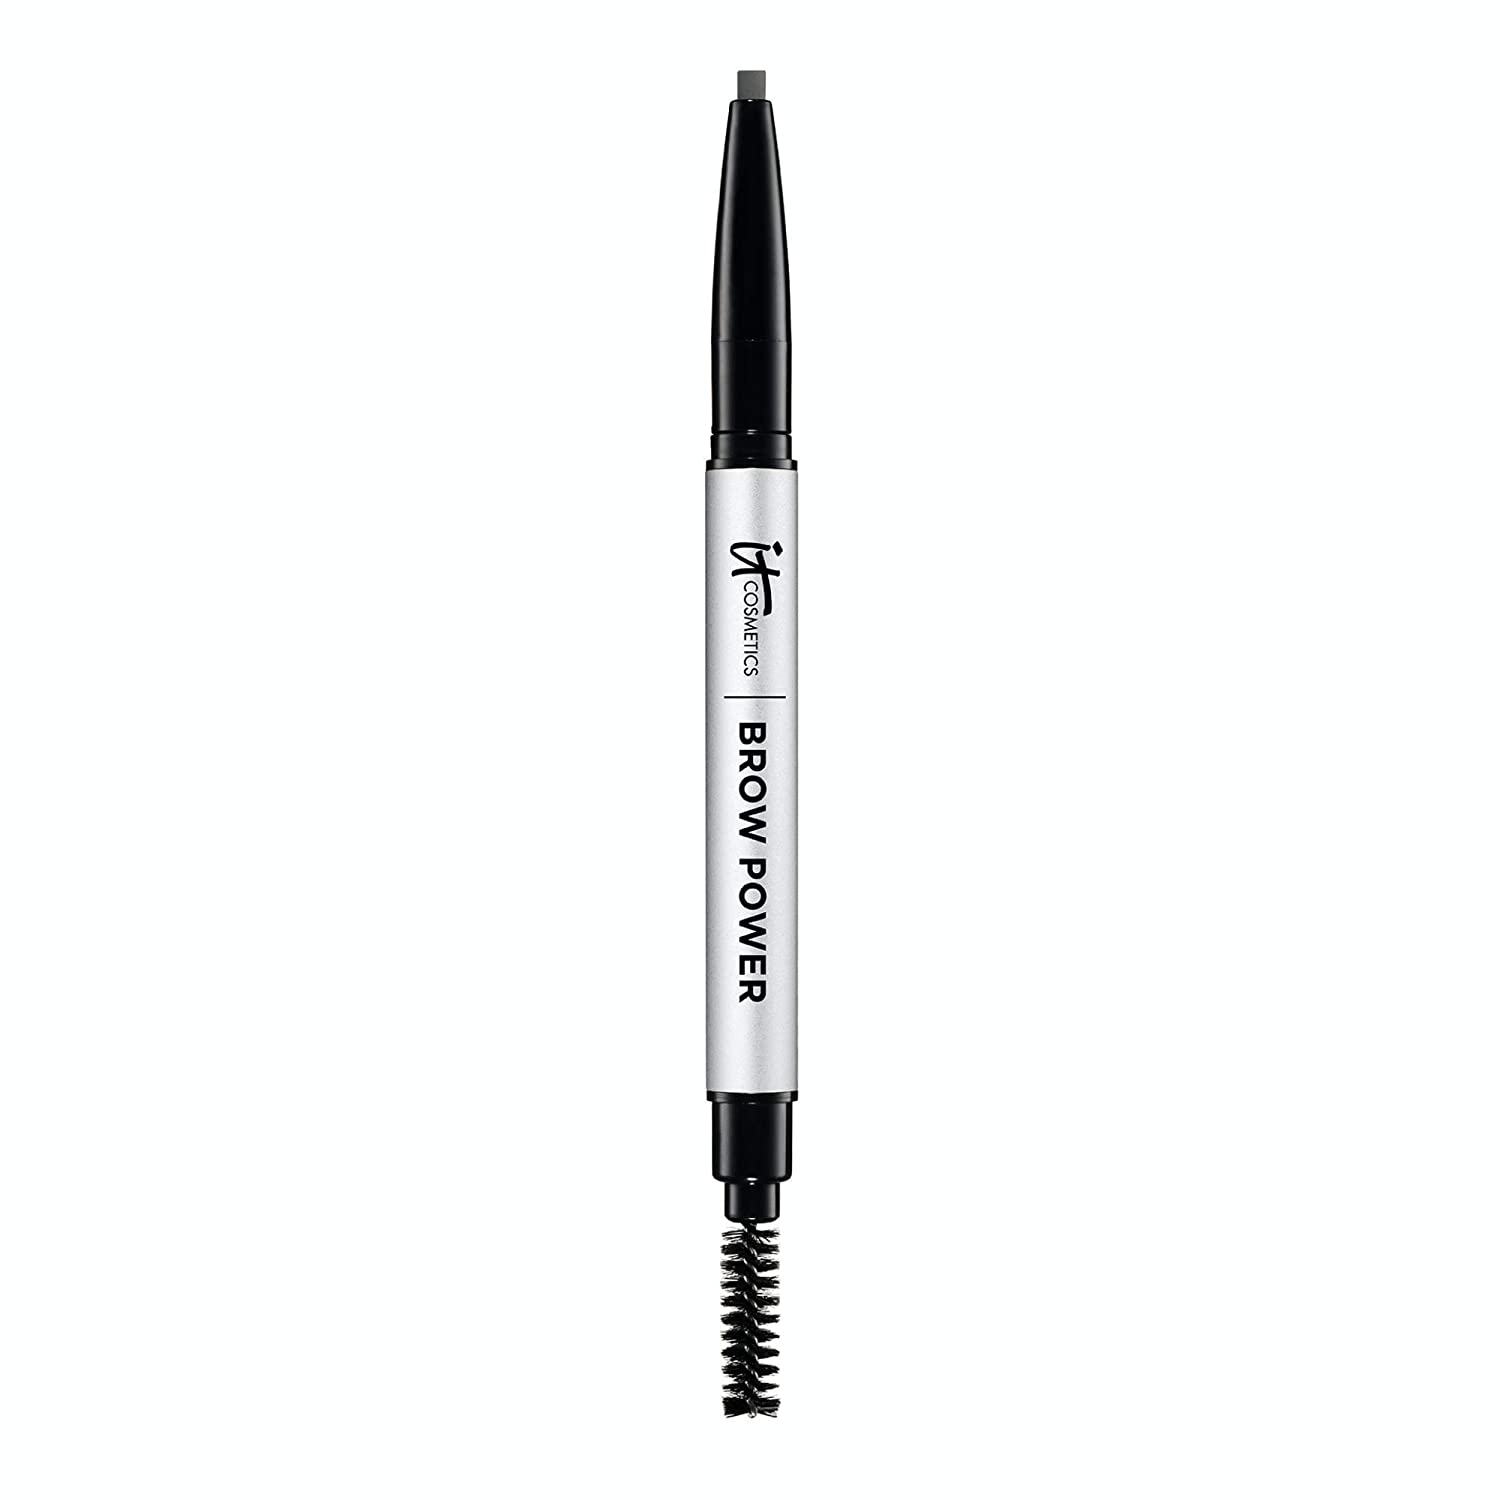 IT Cosmetics Brow Power Oval Tip Brow Pencil